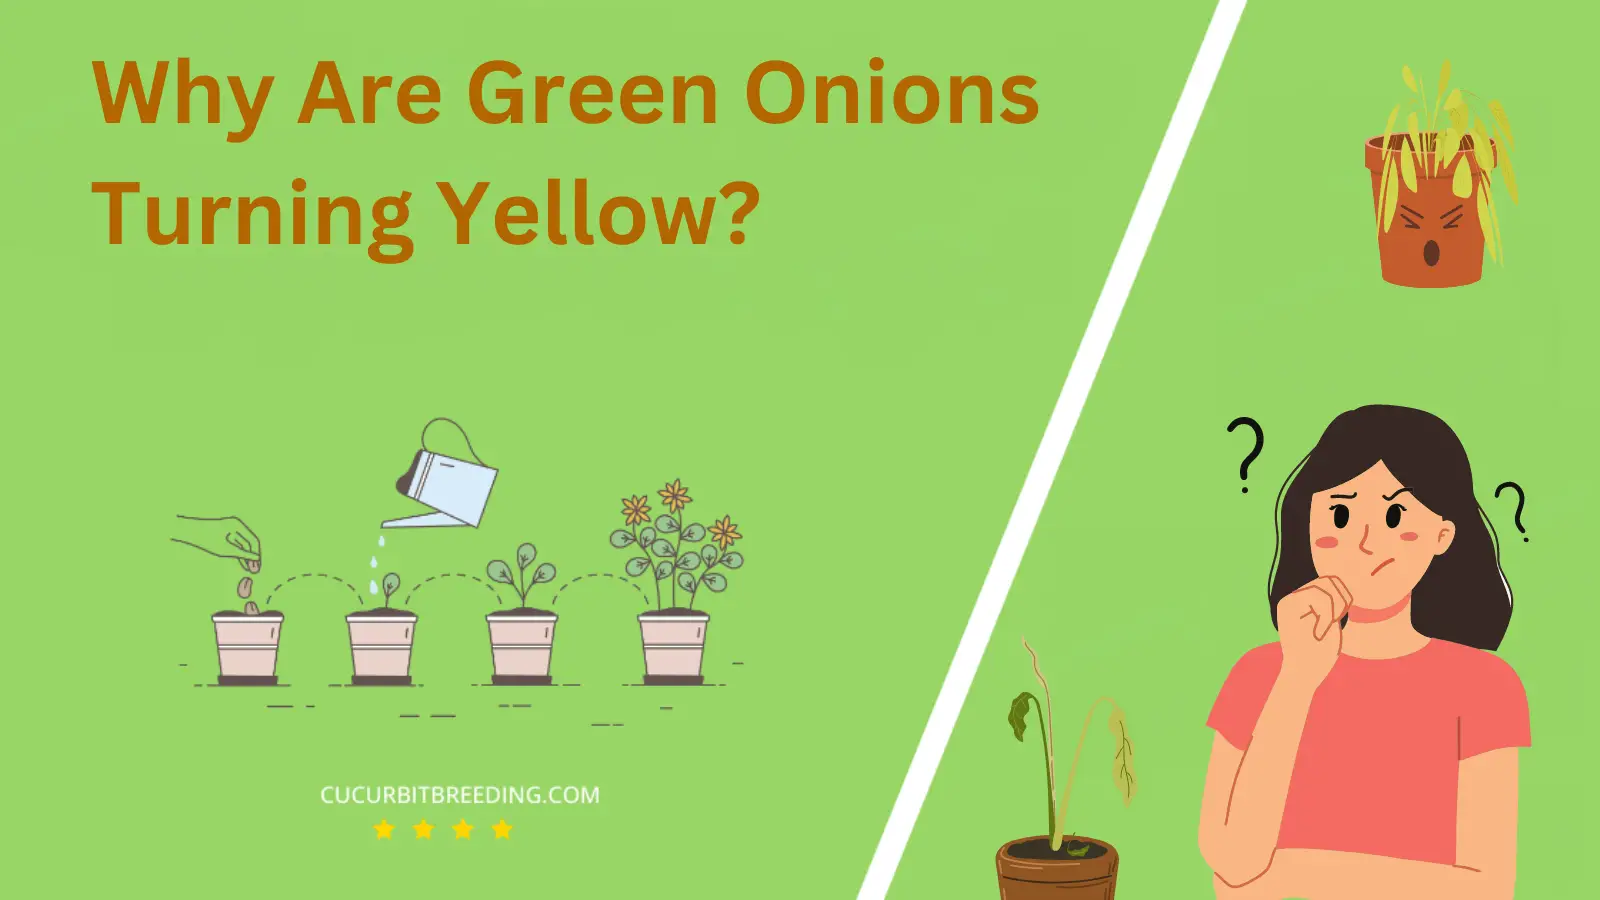 Why Are Green Onions Turning Yellow